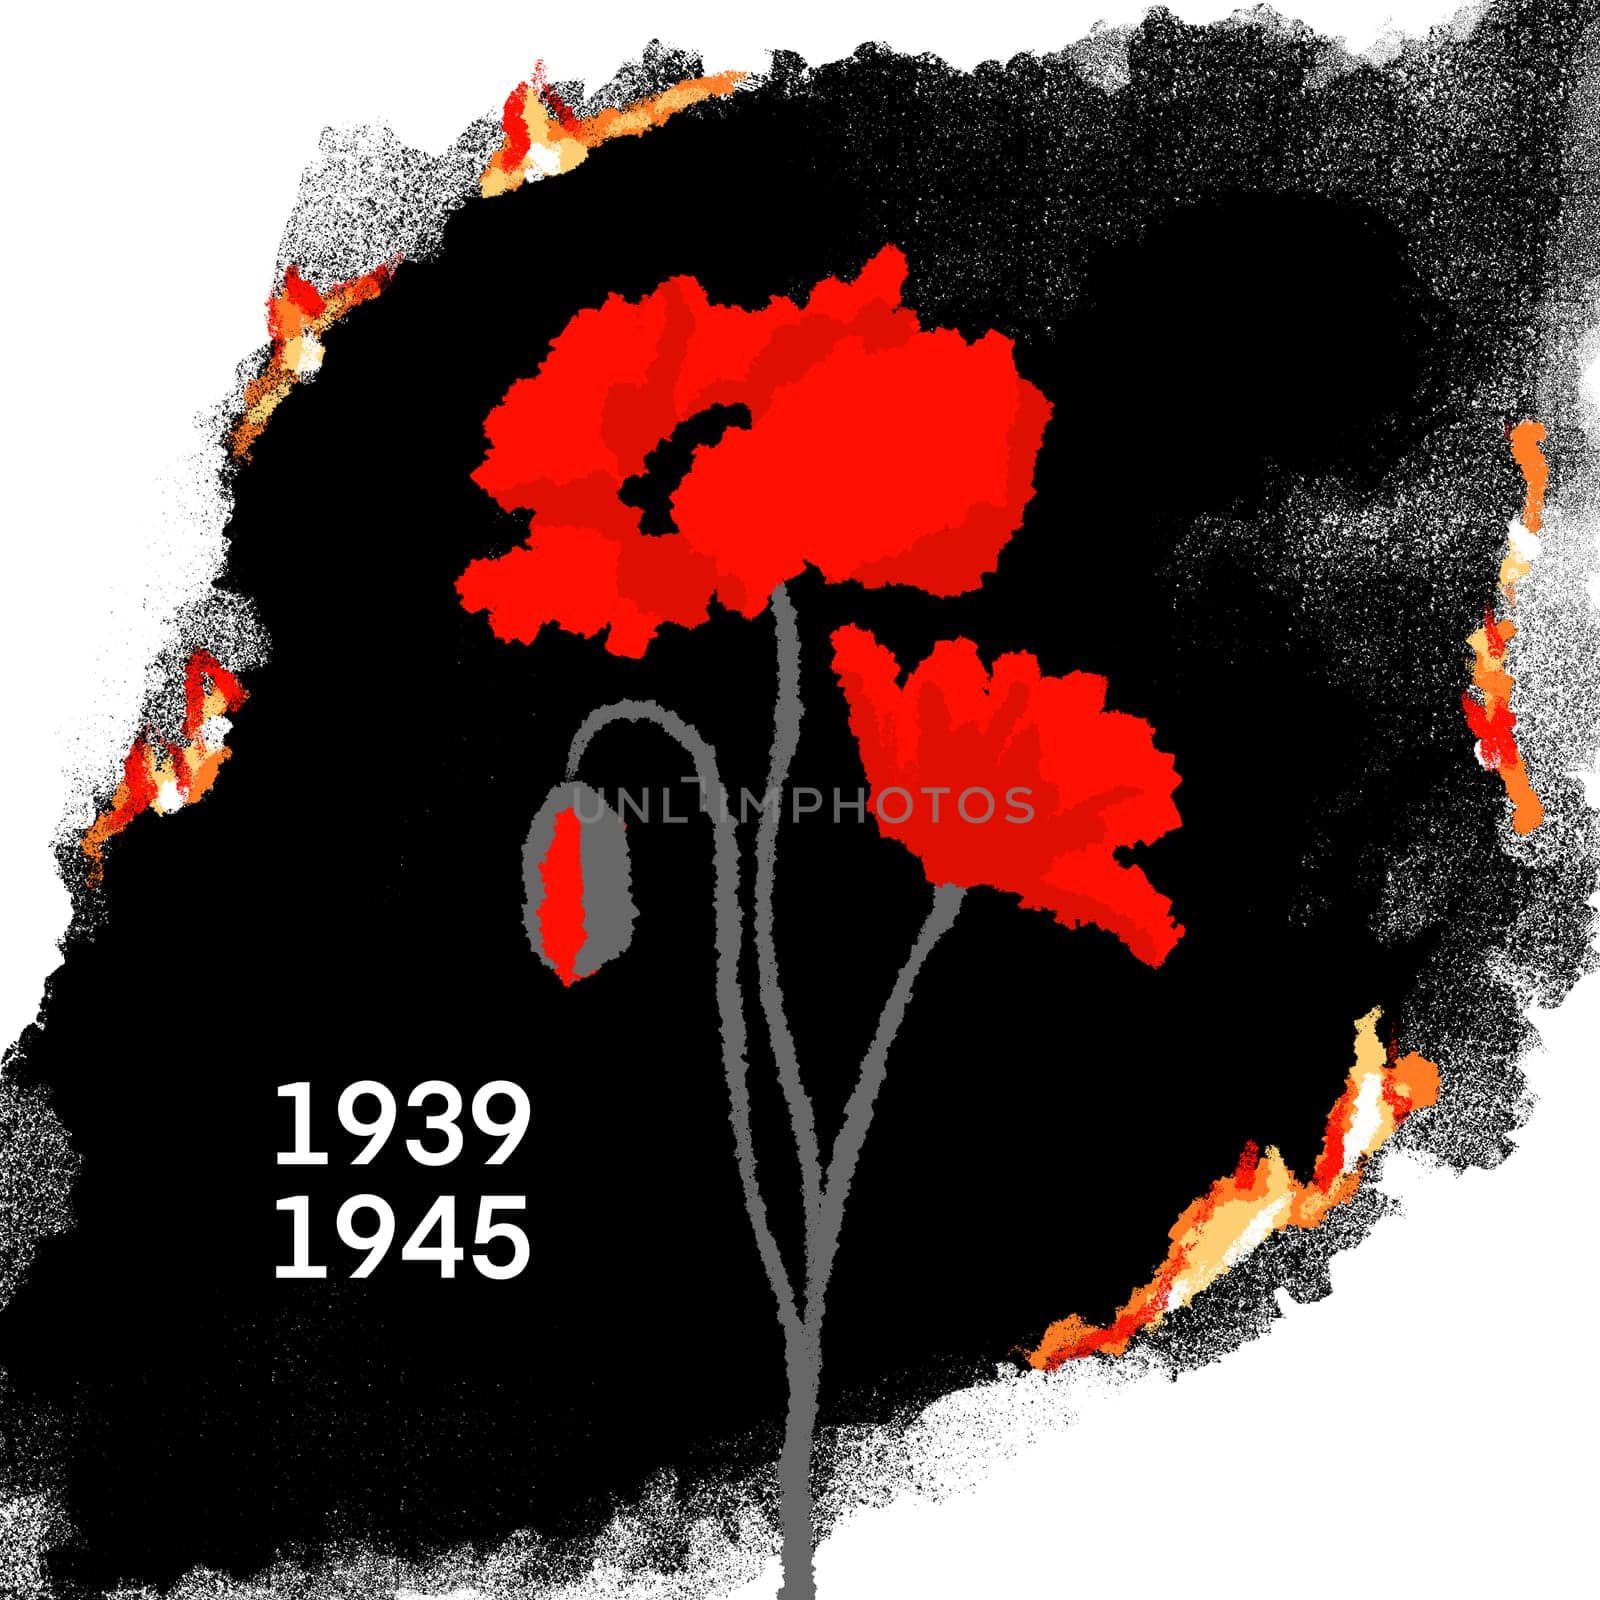 Hand drawn illustration of world war ii two second with red poppies, poppy flower 1939 1945 date. Fire burning paper concept, memorial commemoration poster, rememberance day military symbol history victory design. by Lagmar